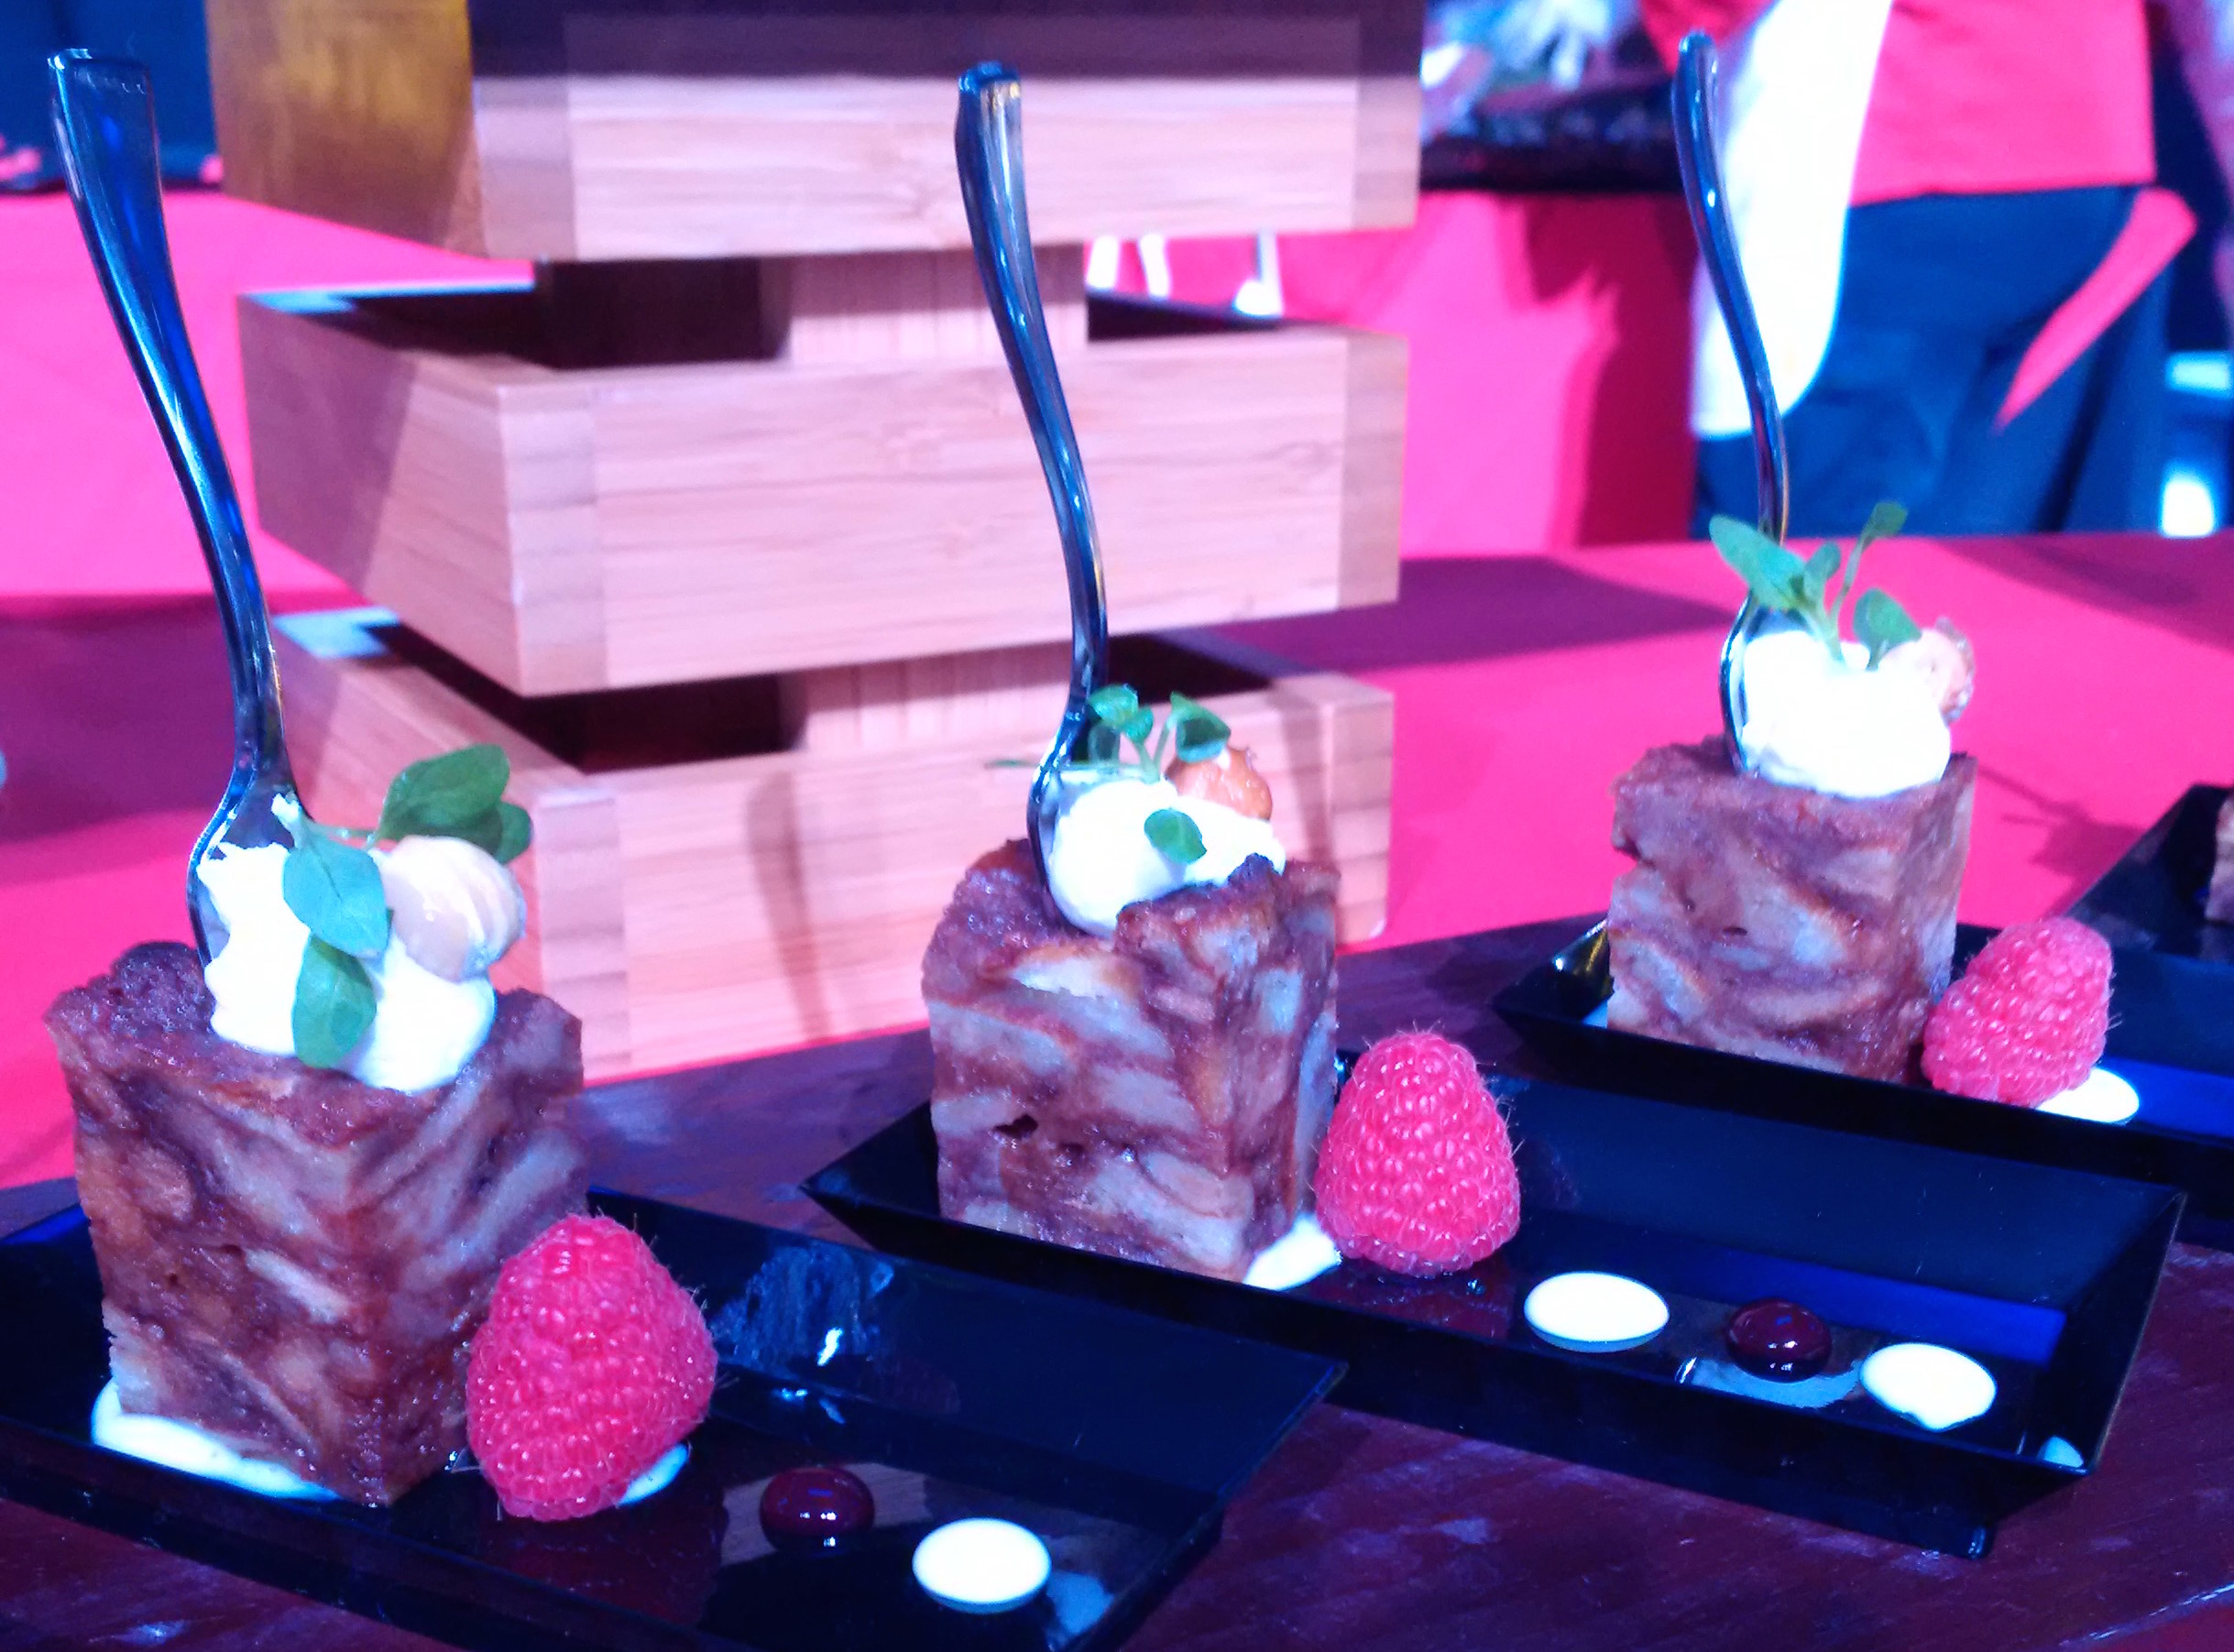 bread pudding at Taste of the NFL